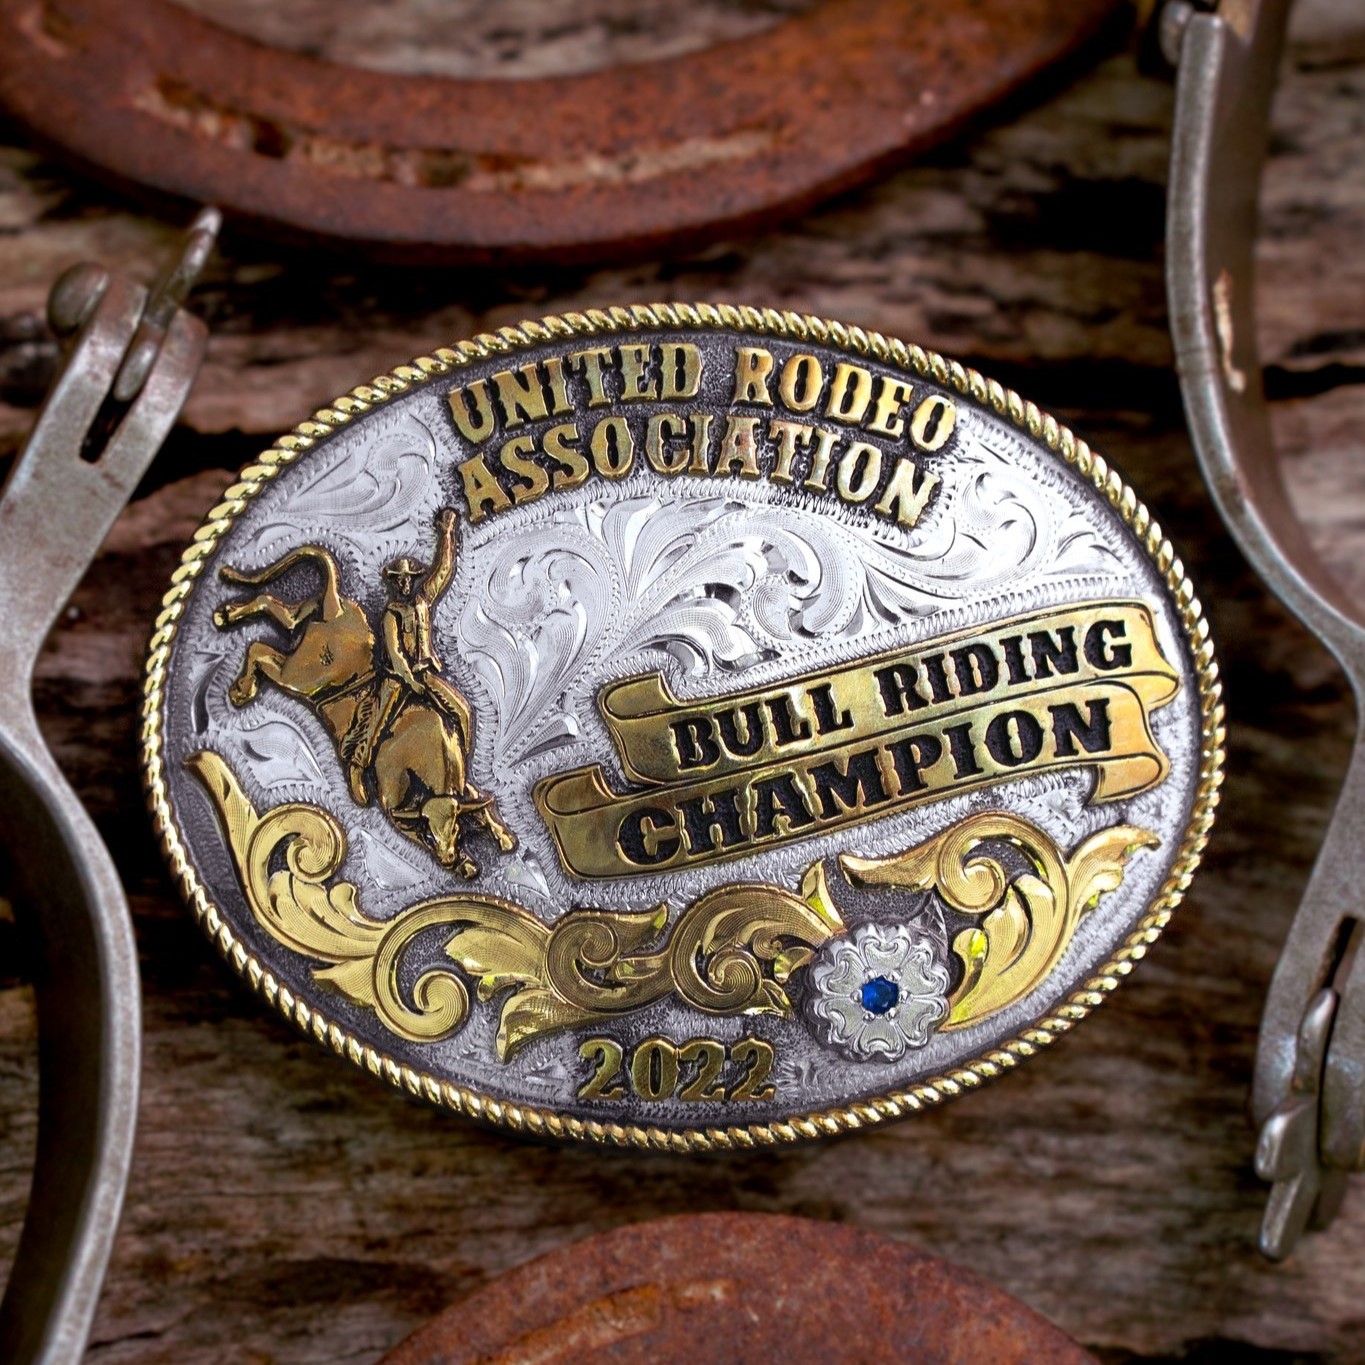 United Rodeo Association Bull Riding Champion 2022 - Rodeo Buckle Gallery 2